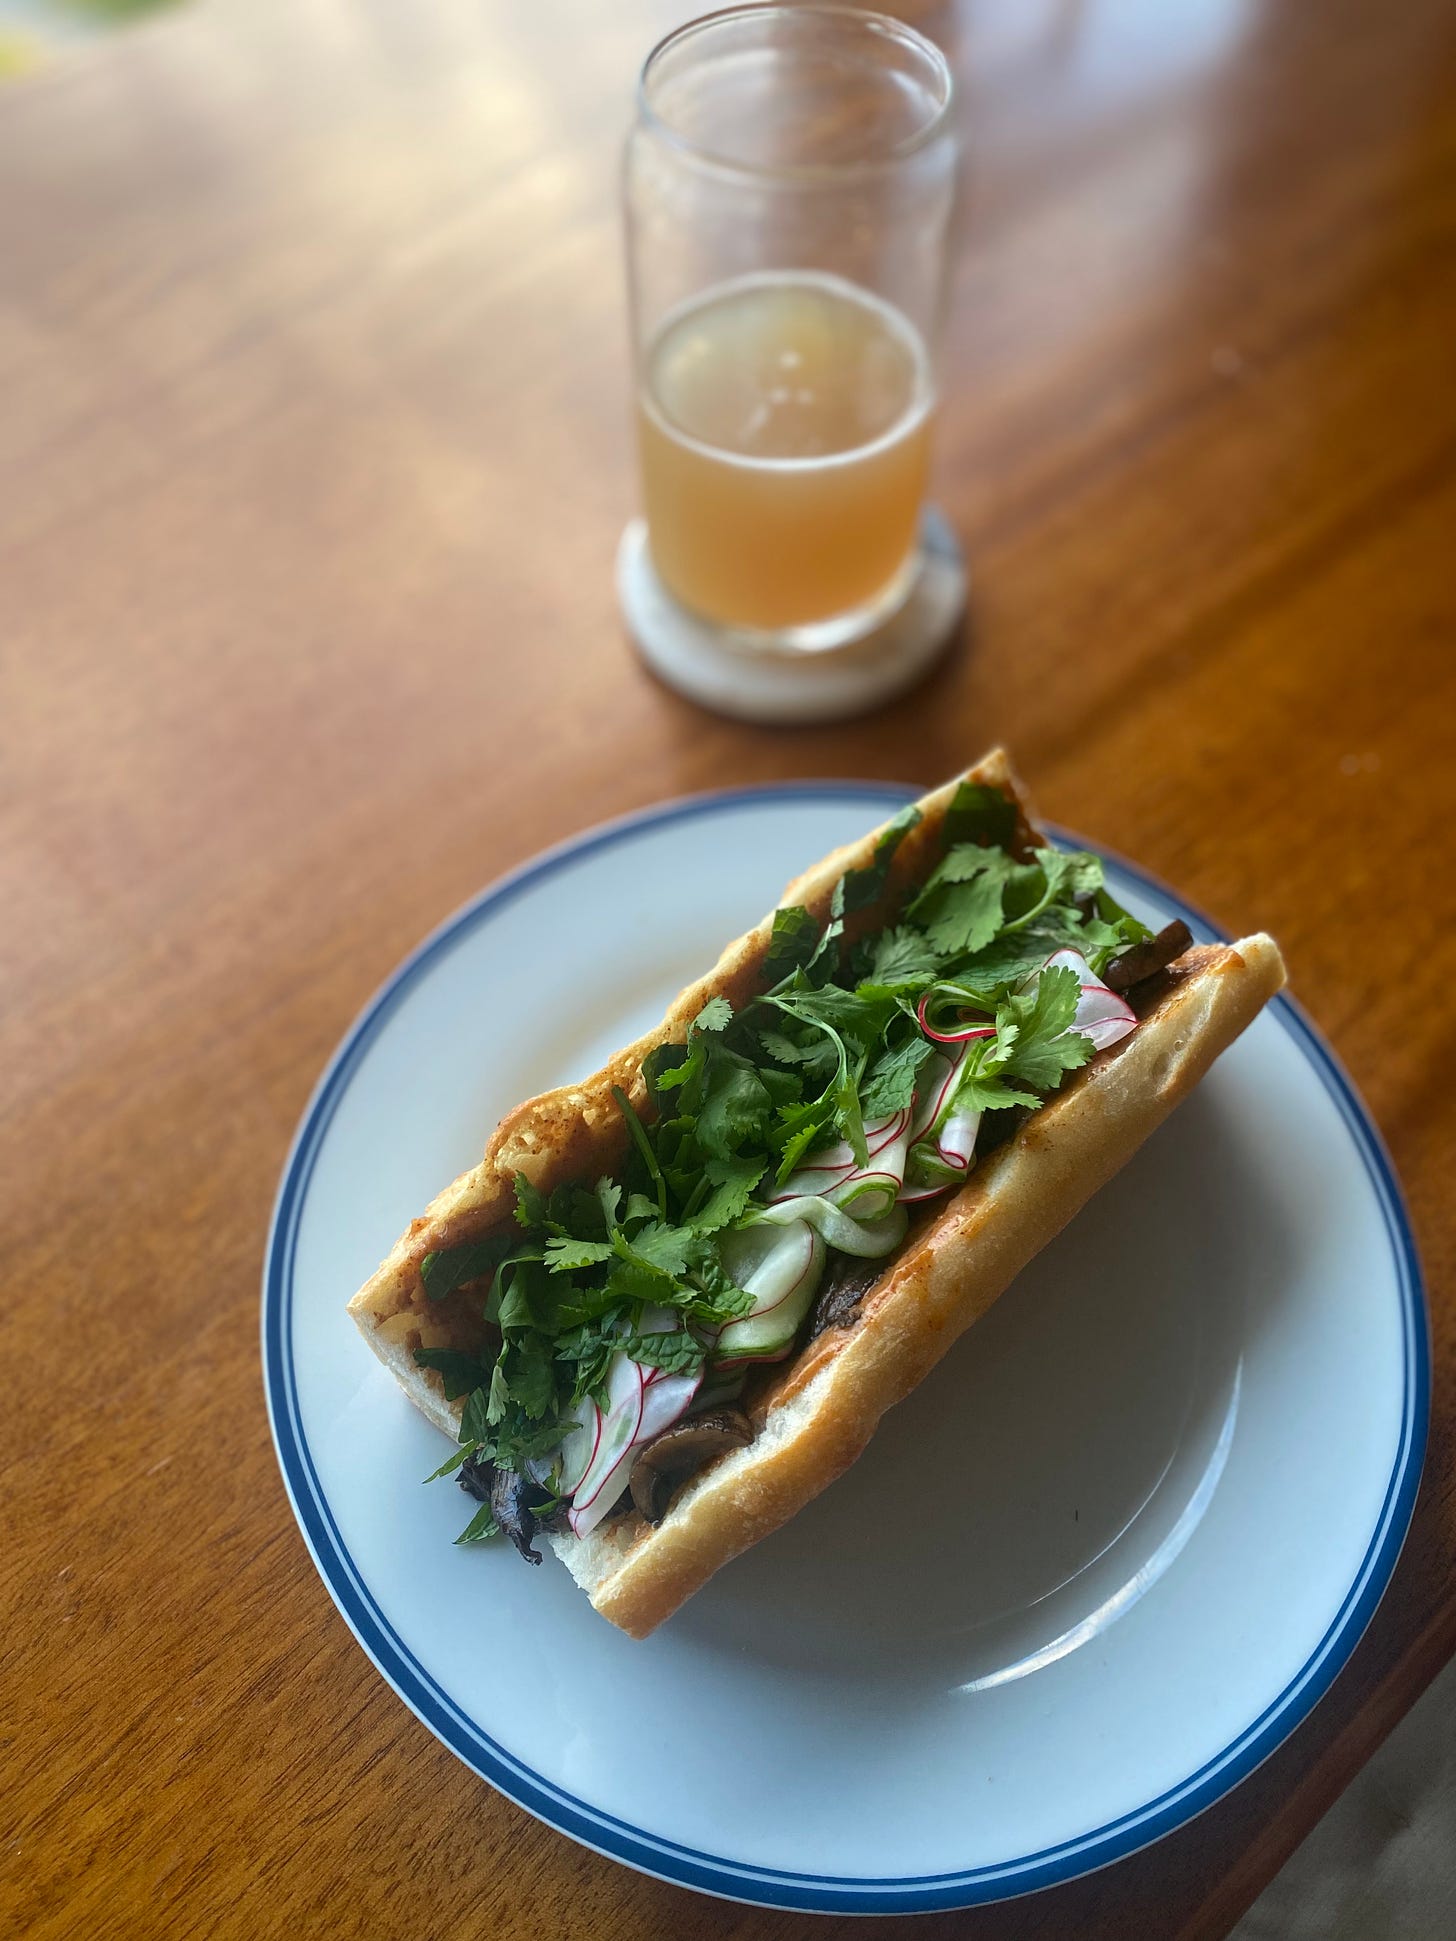 The banh mi described above, viewed from above, with lots of herbs and quick pickles visible. The baguette is open but not fully halved, and you can just see the sauce spilling out a bit at the edge, and some of the mushrooms beneath the vegetables. On a coaster behind the plate is a half-full glass of hazy IPA.